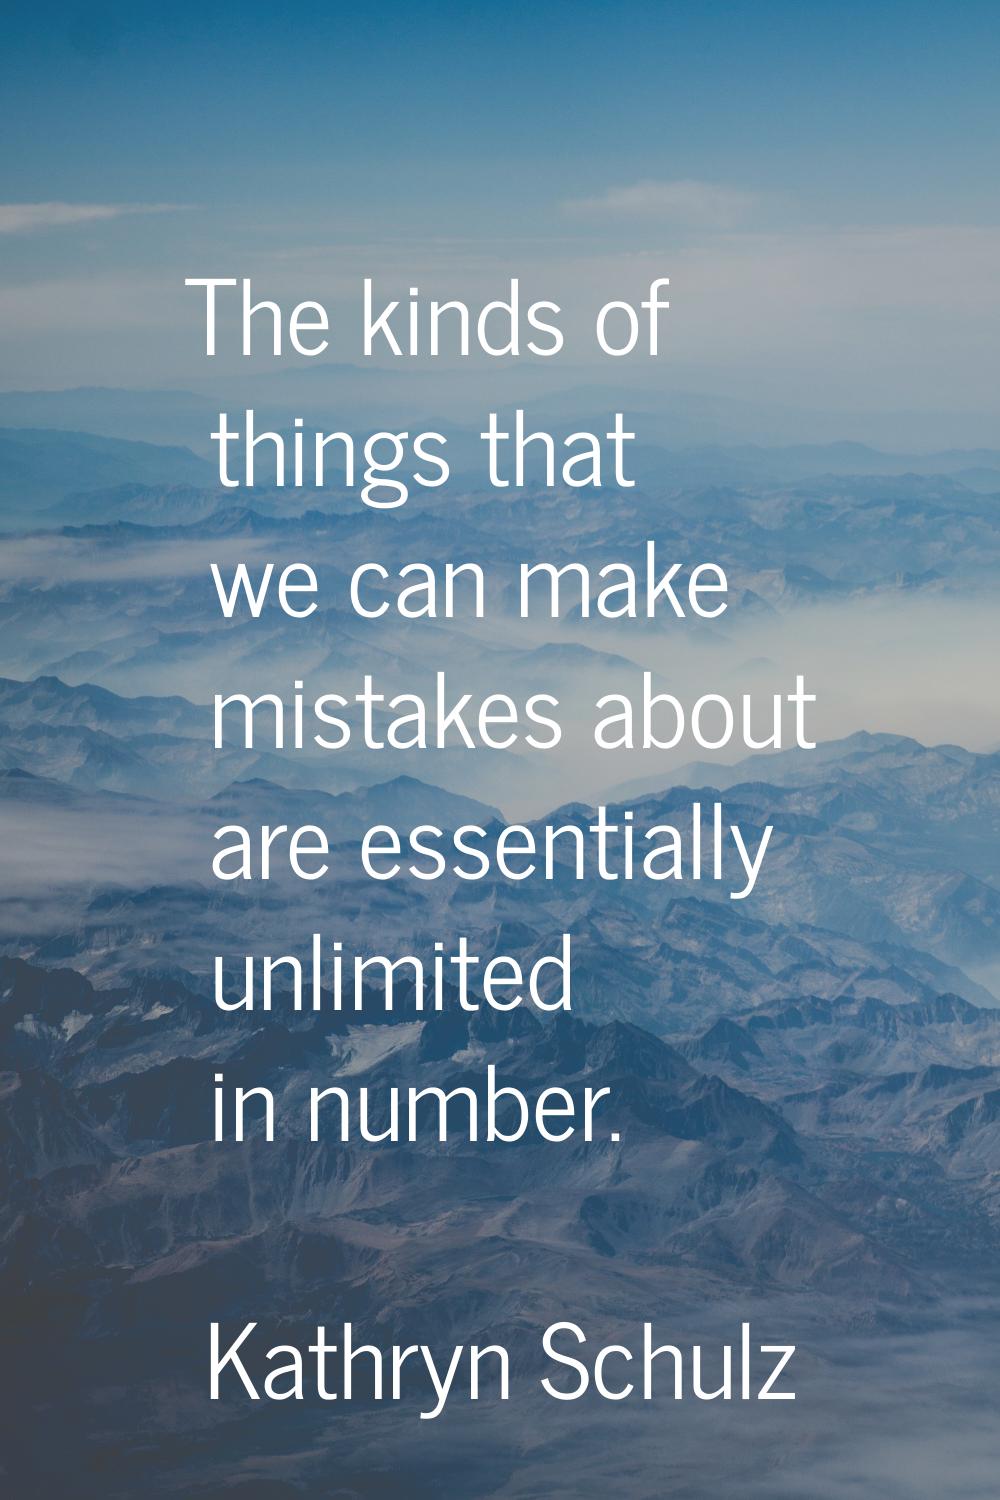 The kinds of things that we can make mistakes about are essentially unlimited in number.